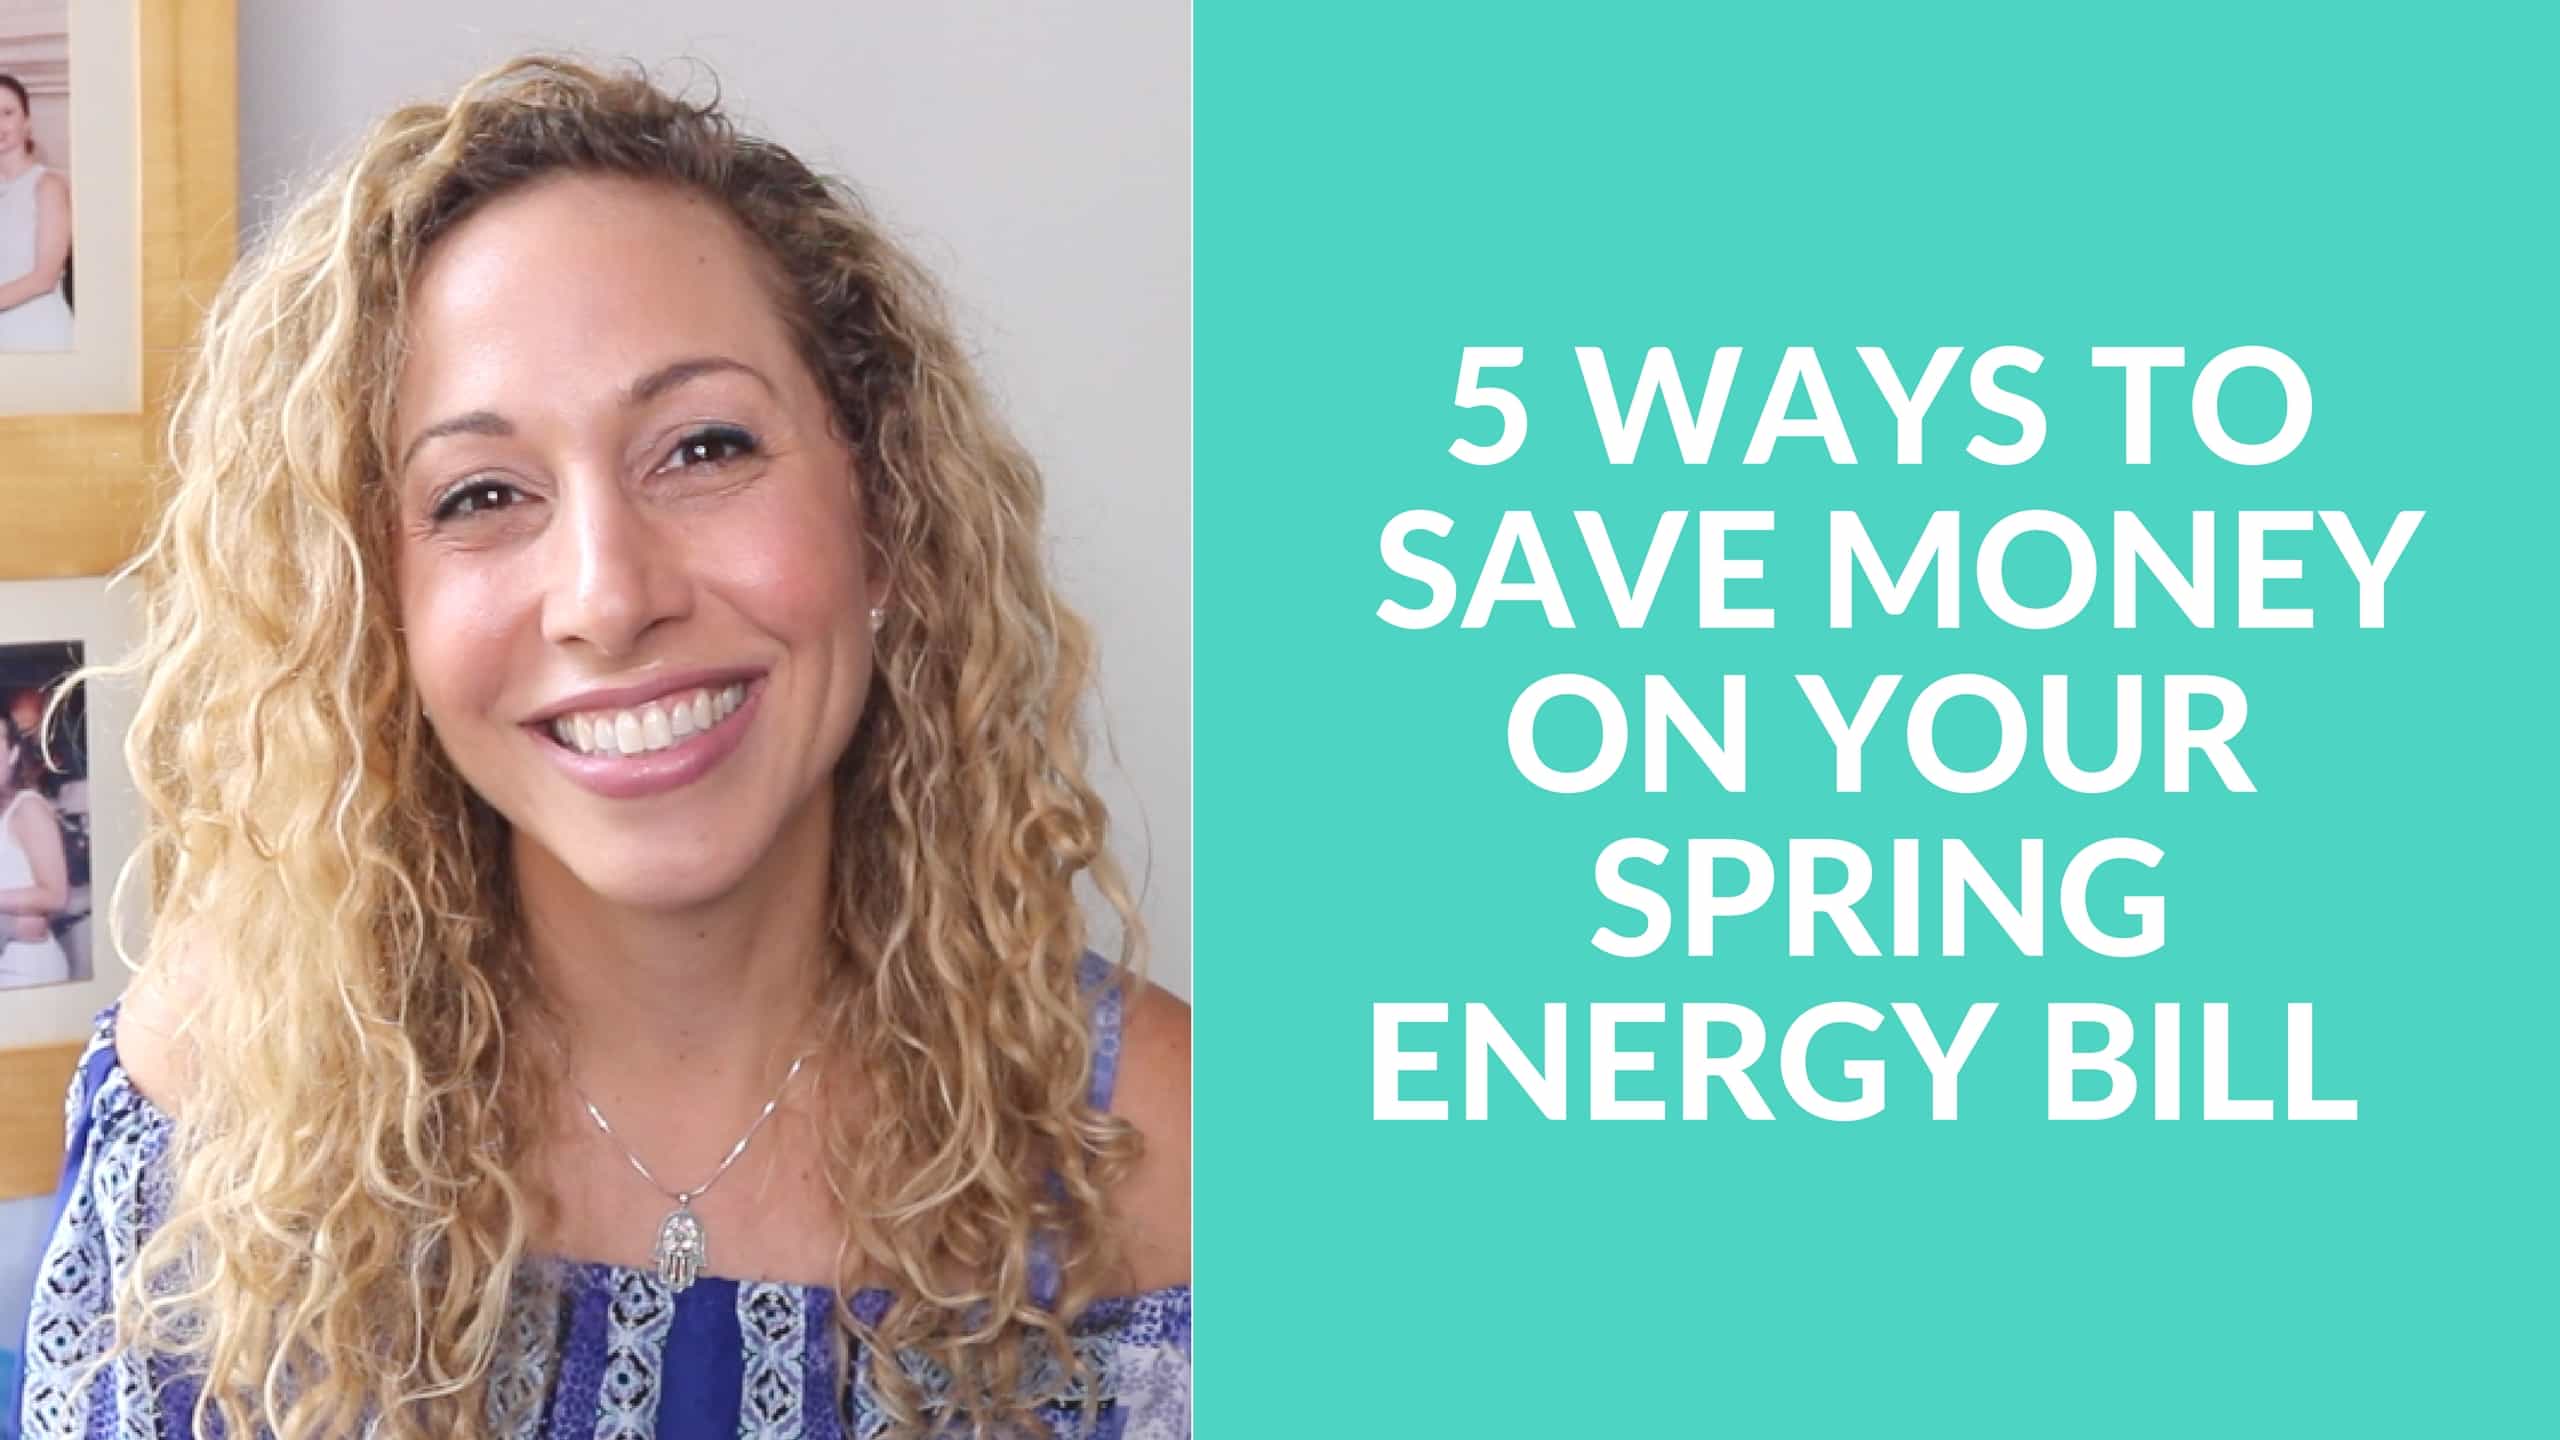 5 Tips That Help You Save Money On Your Energy Bill